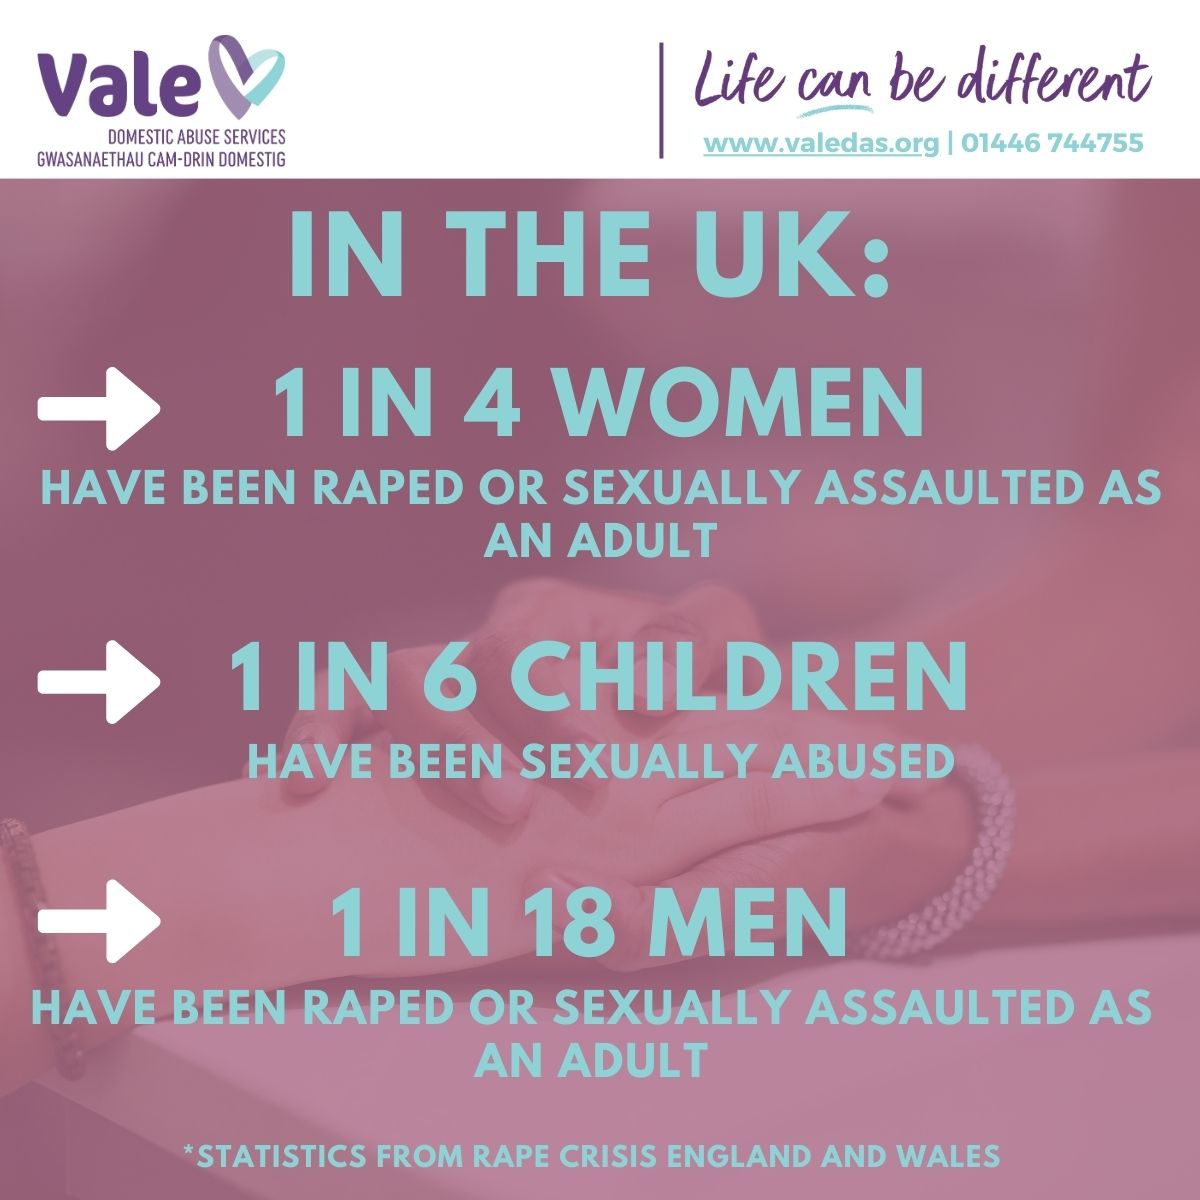 According to Rape Crisis England and Wales: - 1 in 4 women, 1 in 6 children and 1 in 18 men have been raped or sexually assaulted as an adult. We are here to help and support you. Call: 01446 744755 Email: info@valedas.org #ItsNotOk #SexualAbuse #SexualViolenceAwarenessWeek